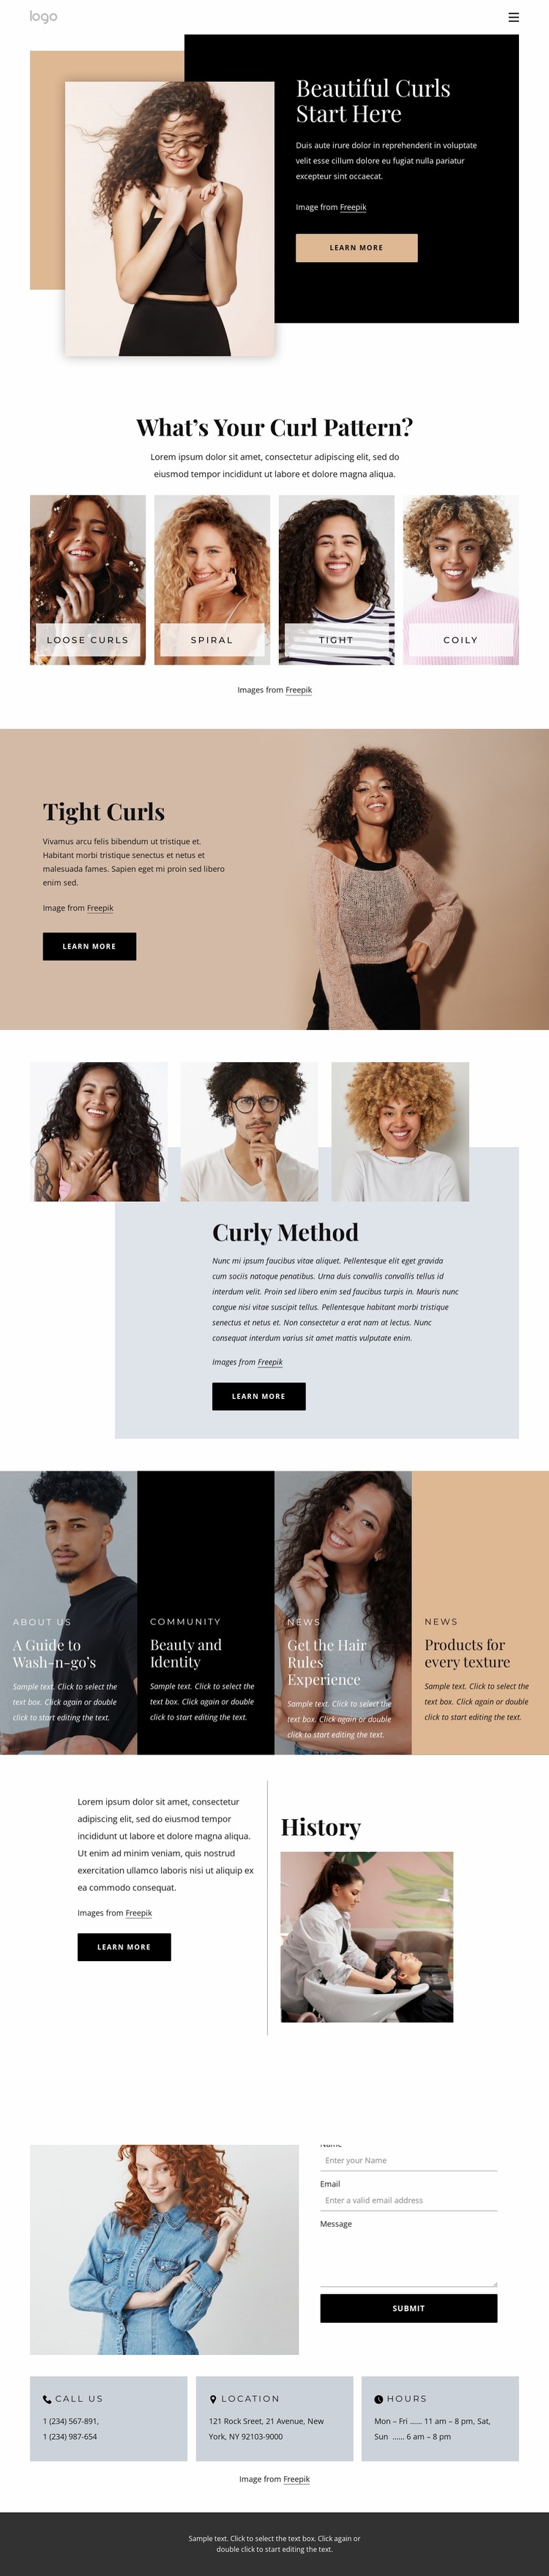 Bring out the best in your curls Website Mockup